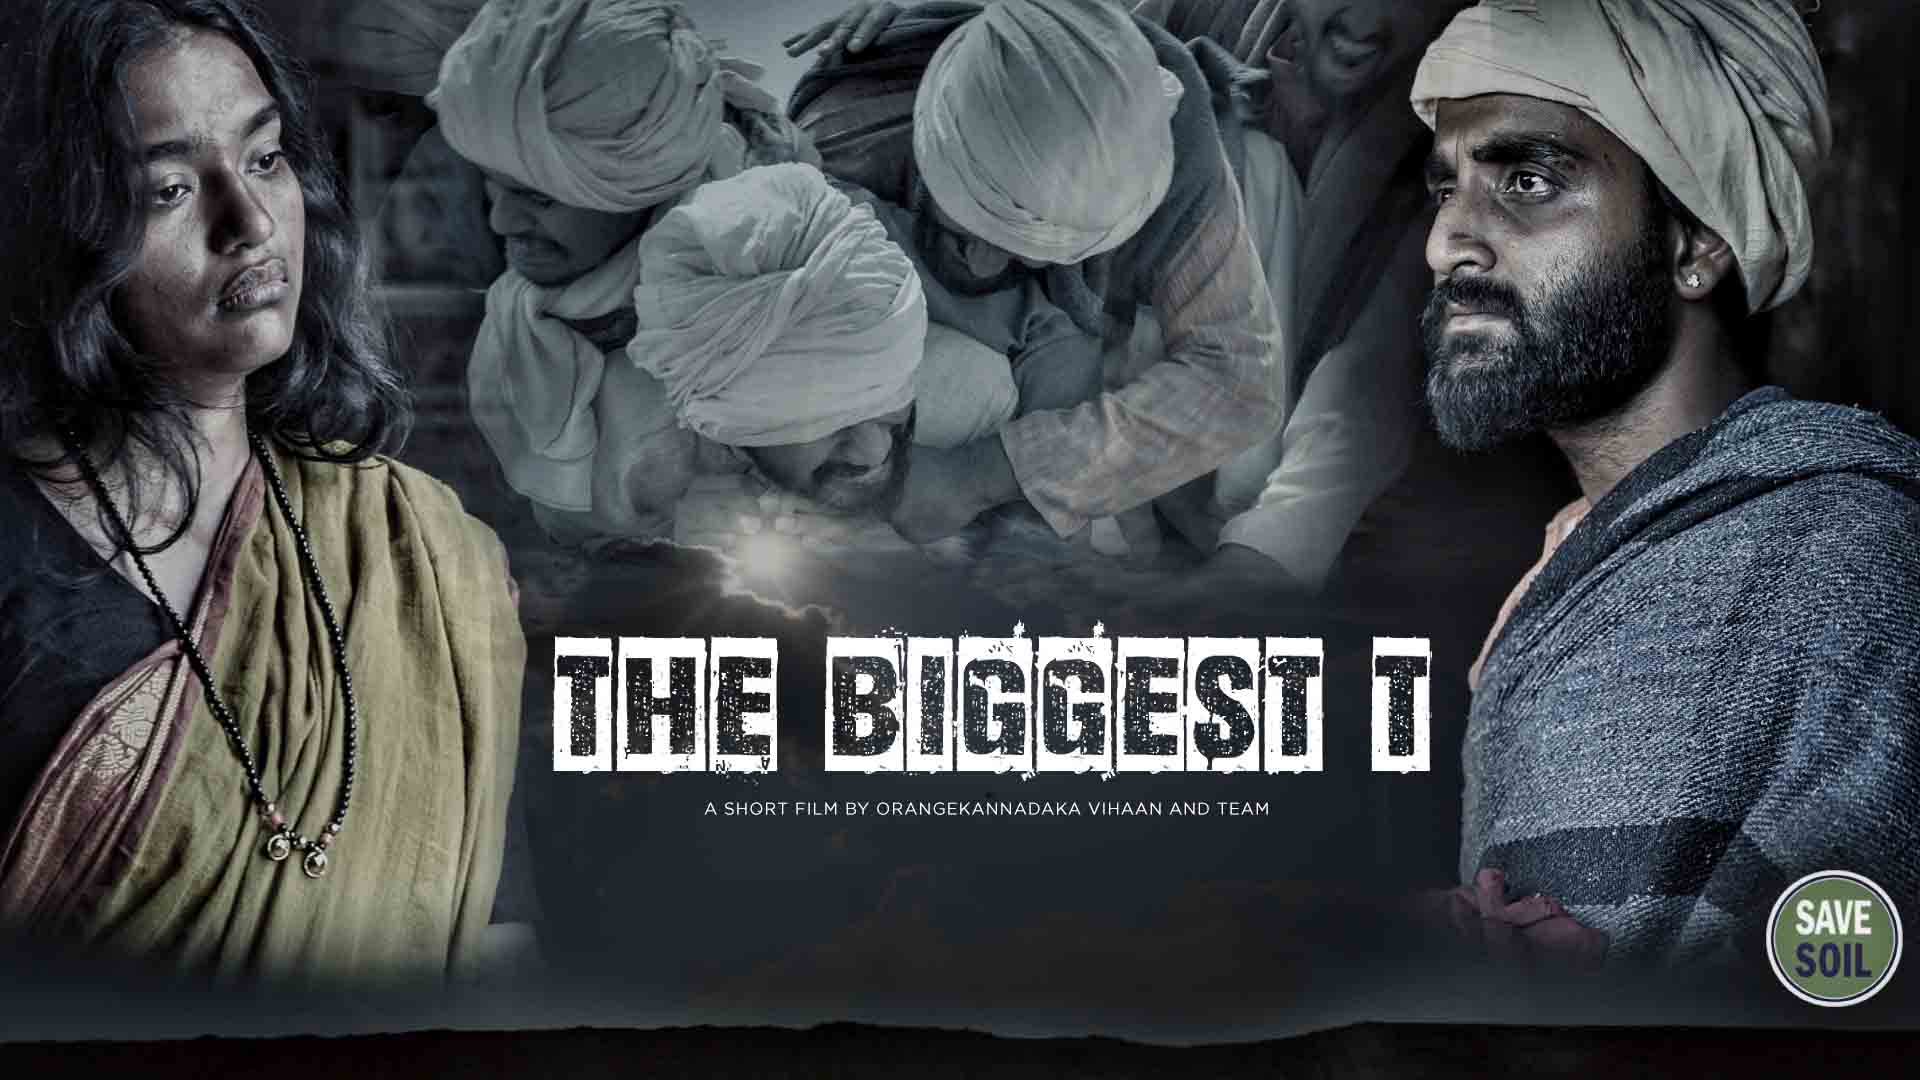 The Biggest T – A Musical short film for SAVE SOIL Movement